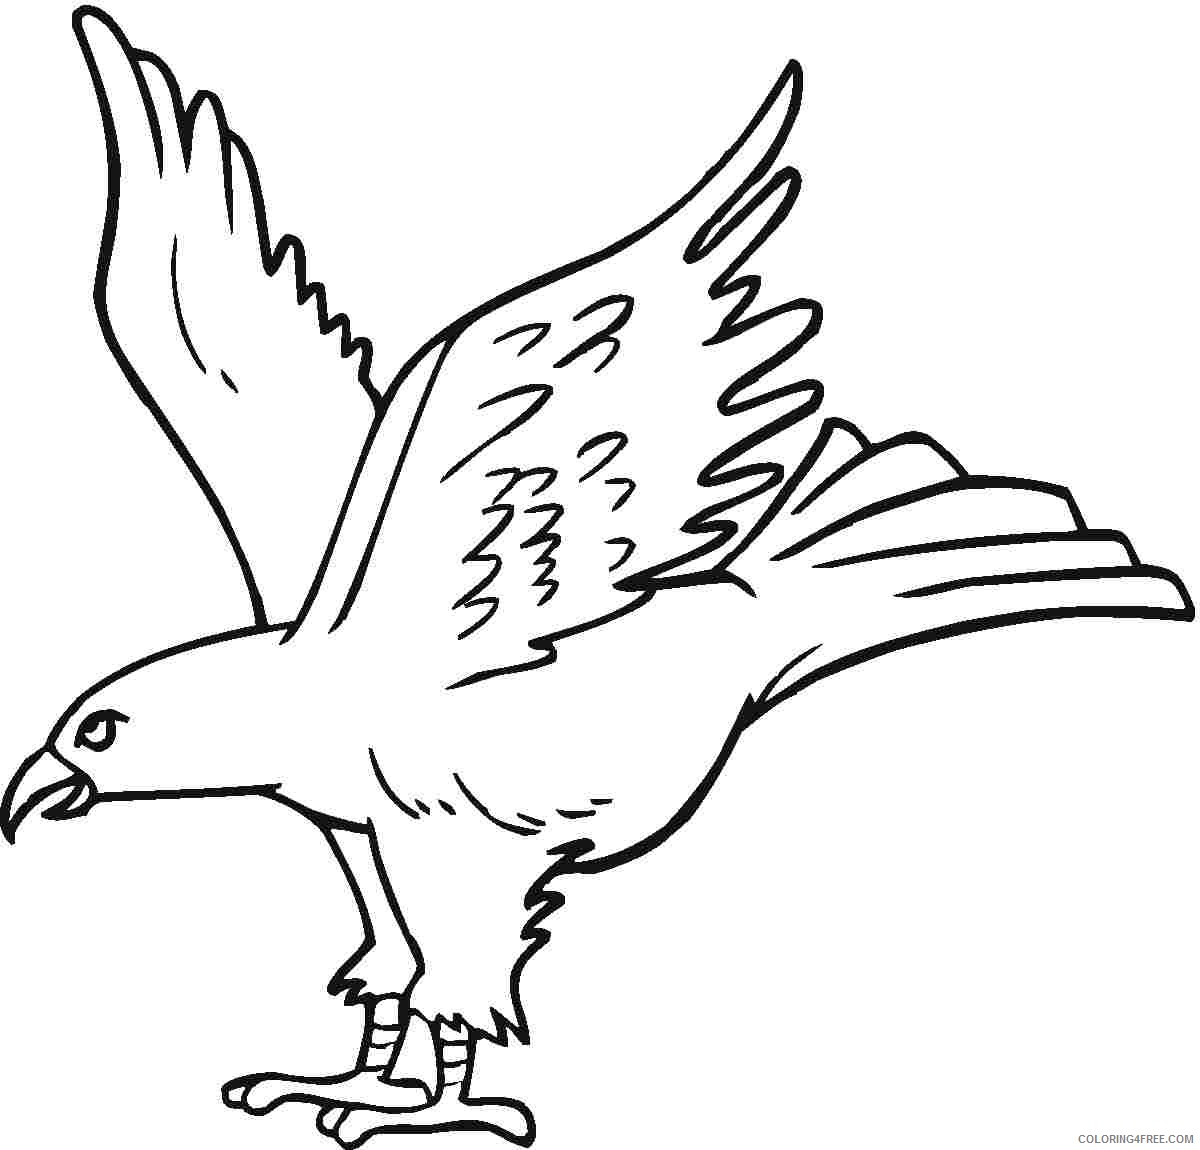 eagle coloring pages for kids Coloring4free